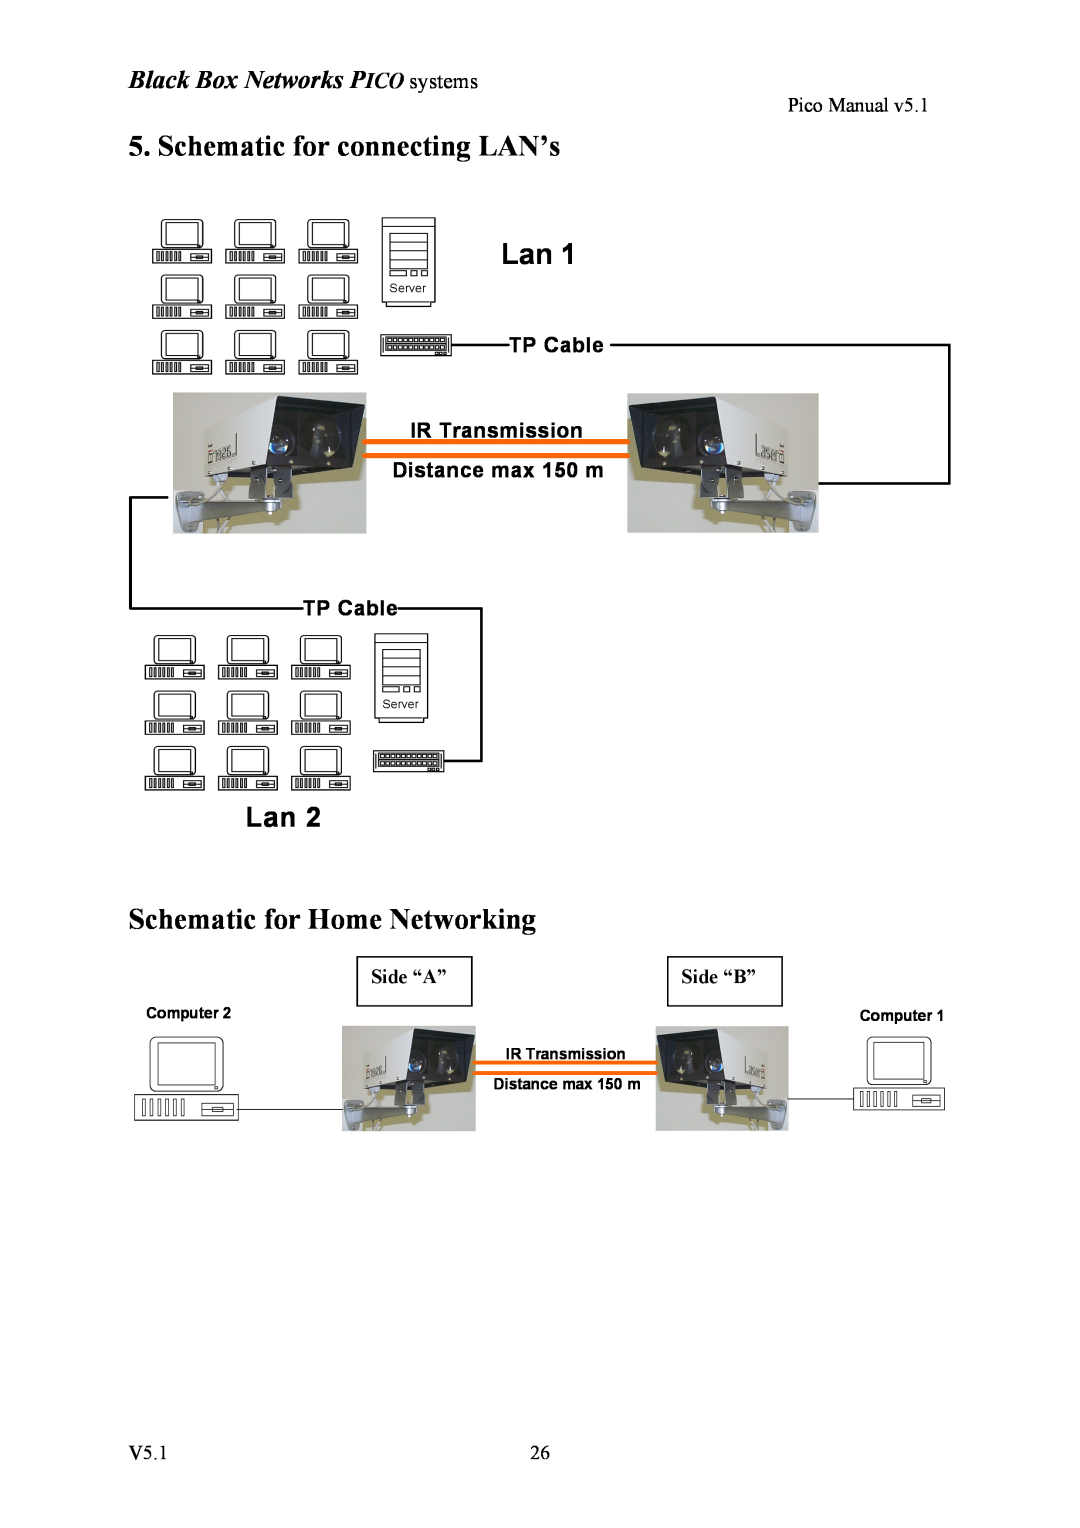 Black Box V5.1 Schematic for connecting LAN’s, Schematic for Home Networking, Black Box Networks PICO systems, TP Cable 